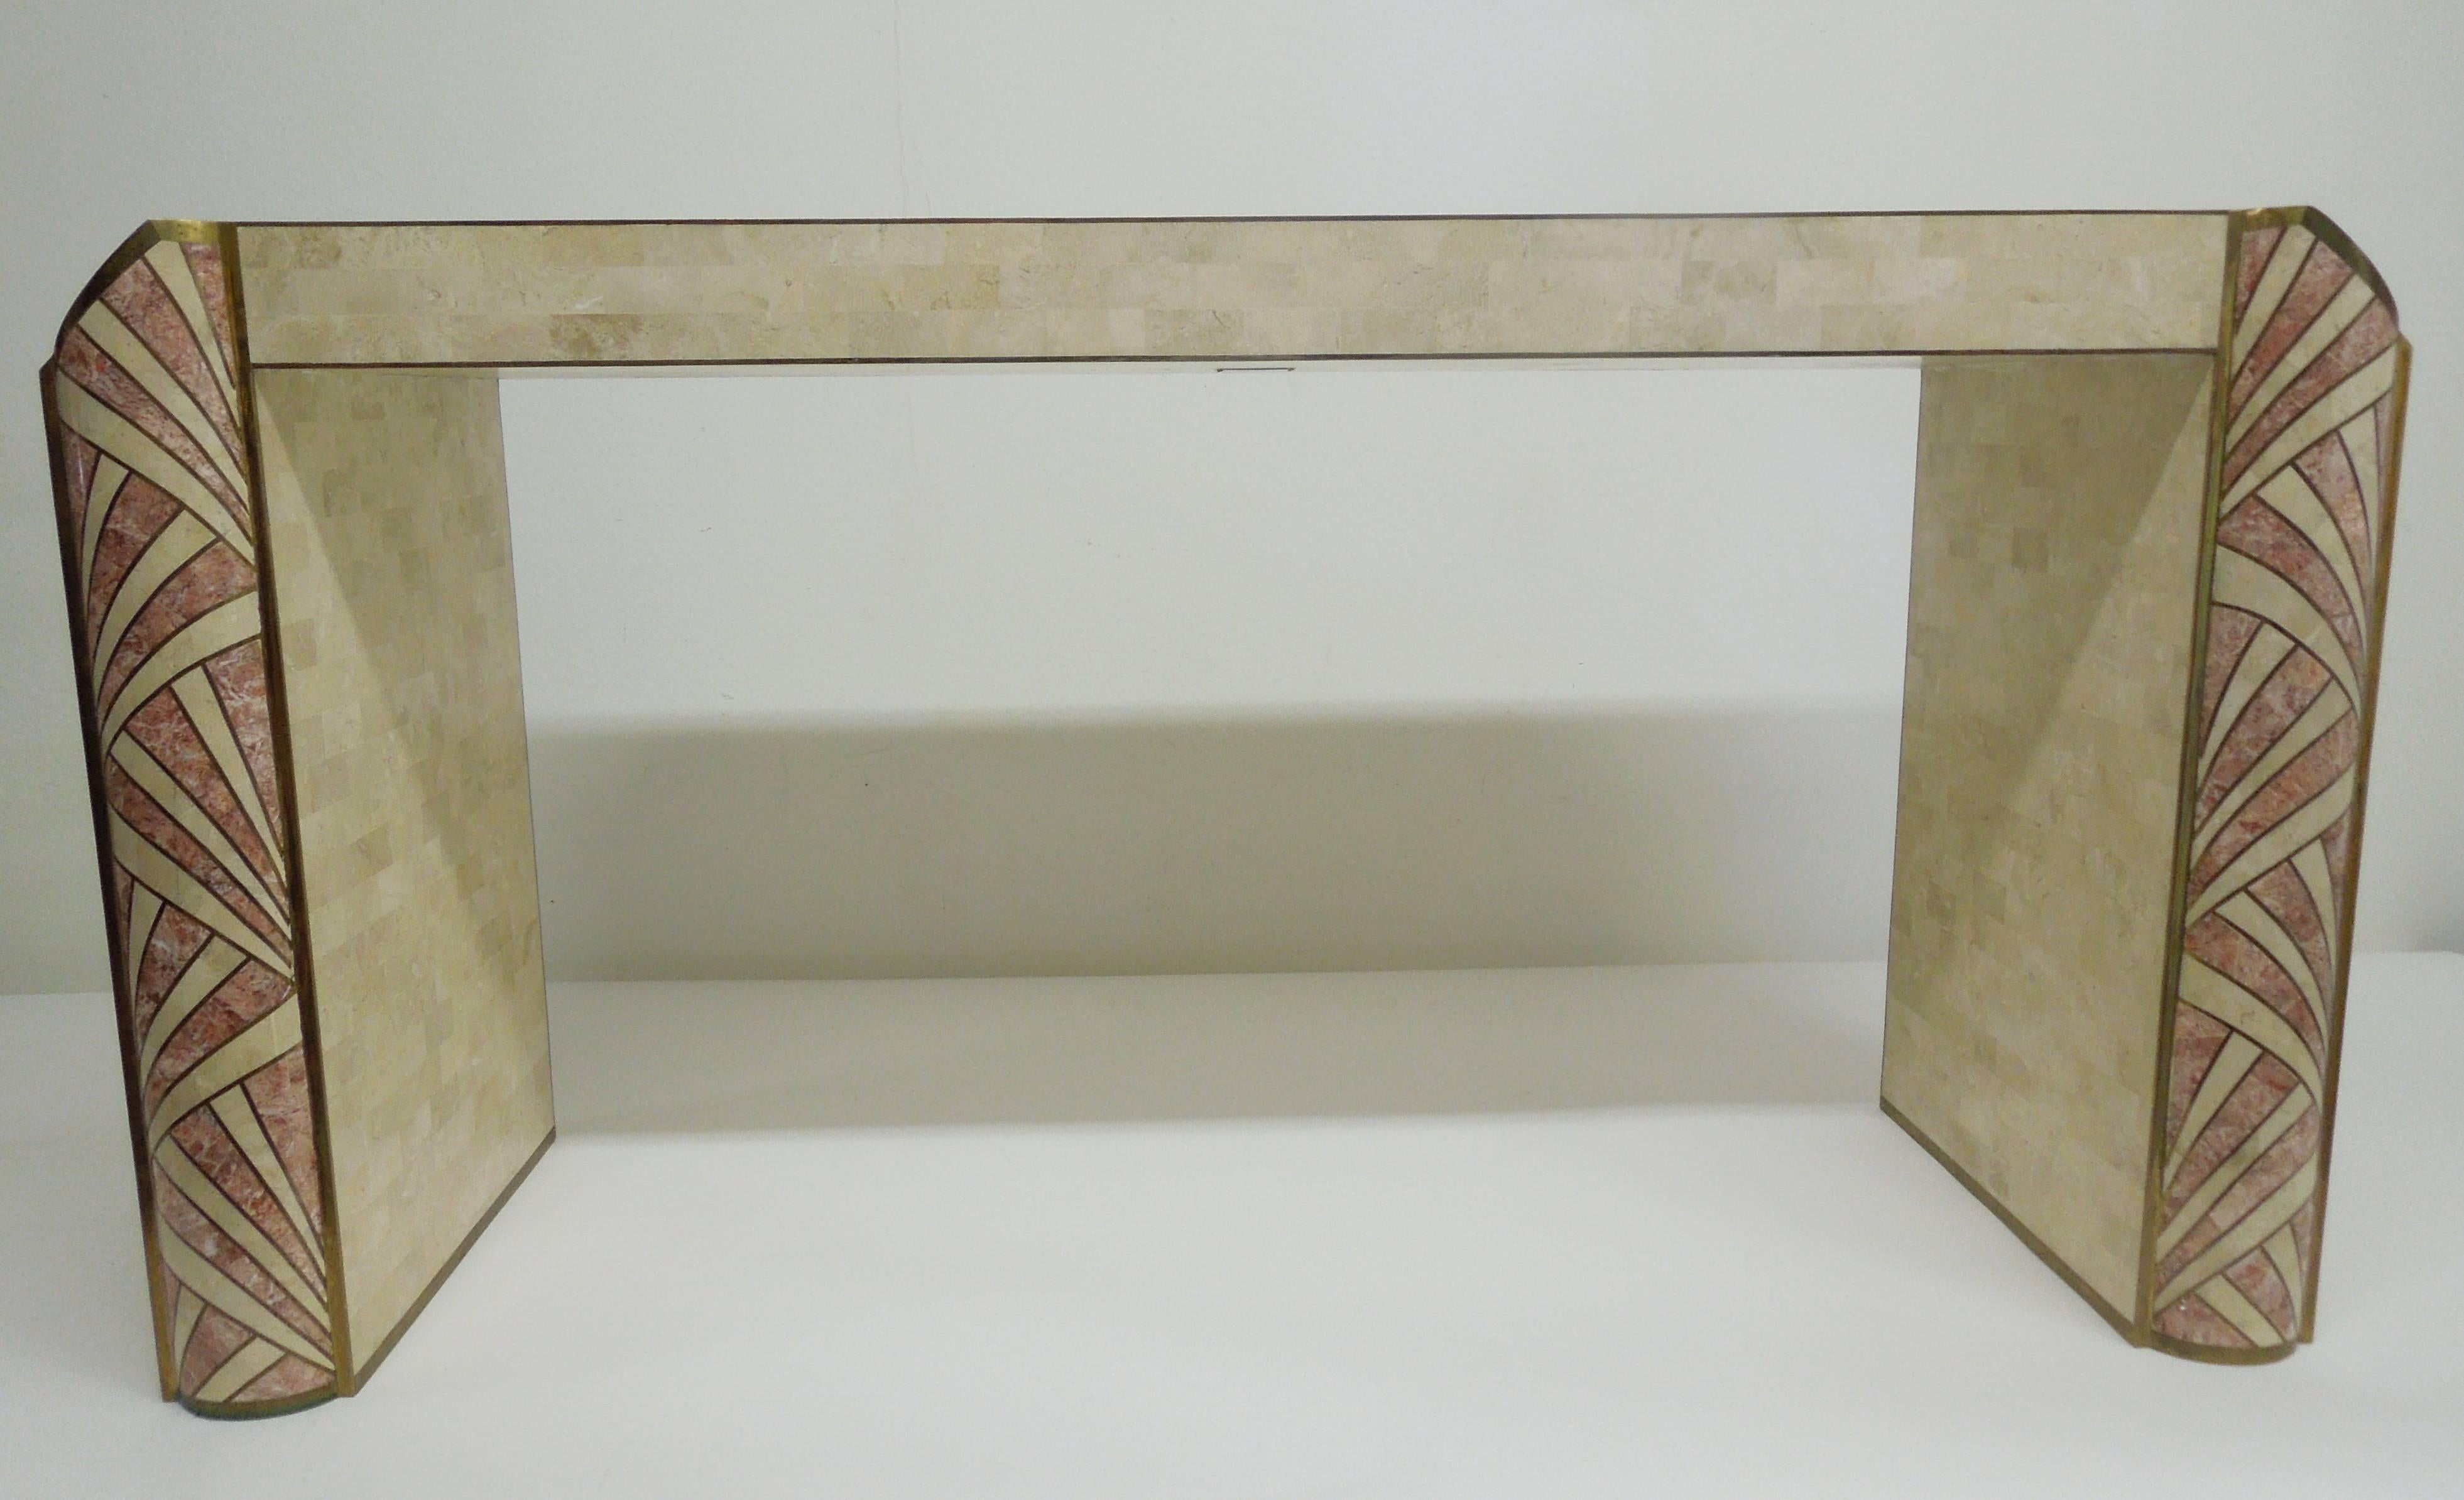 Inlay Art Deco Console Table Inlaid Stone by Maitland-Smith